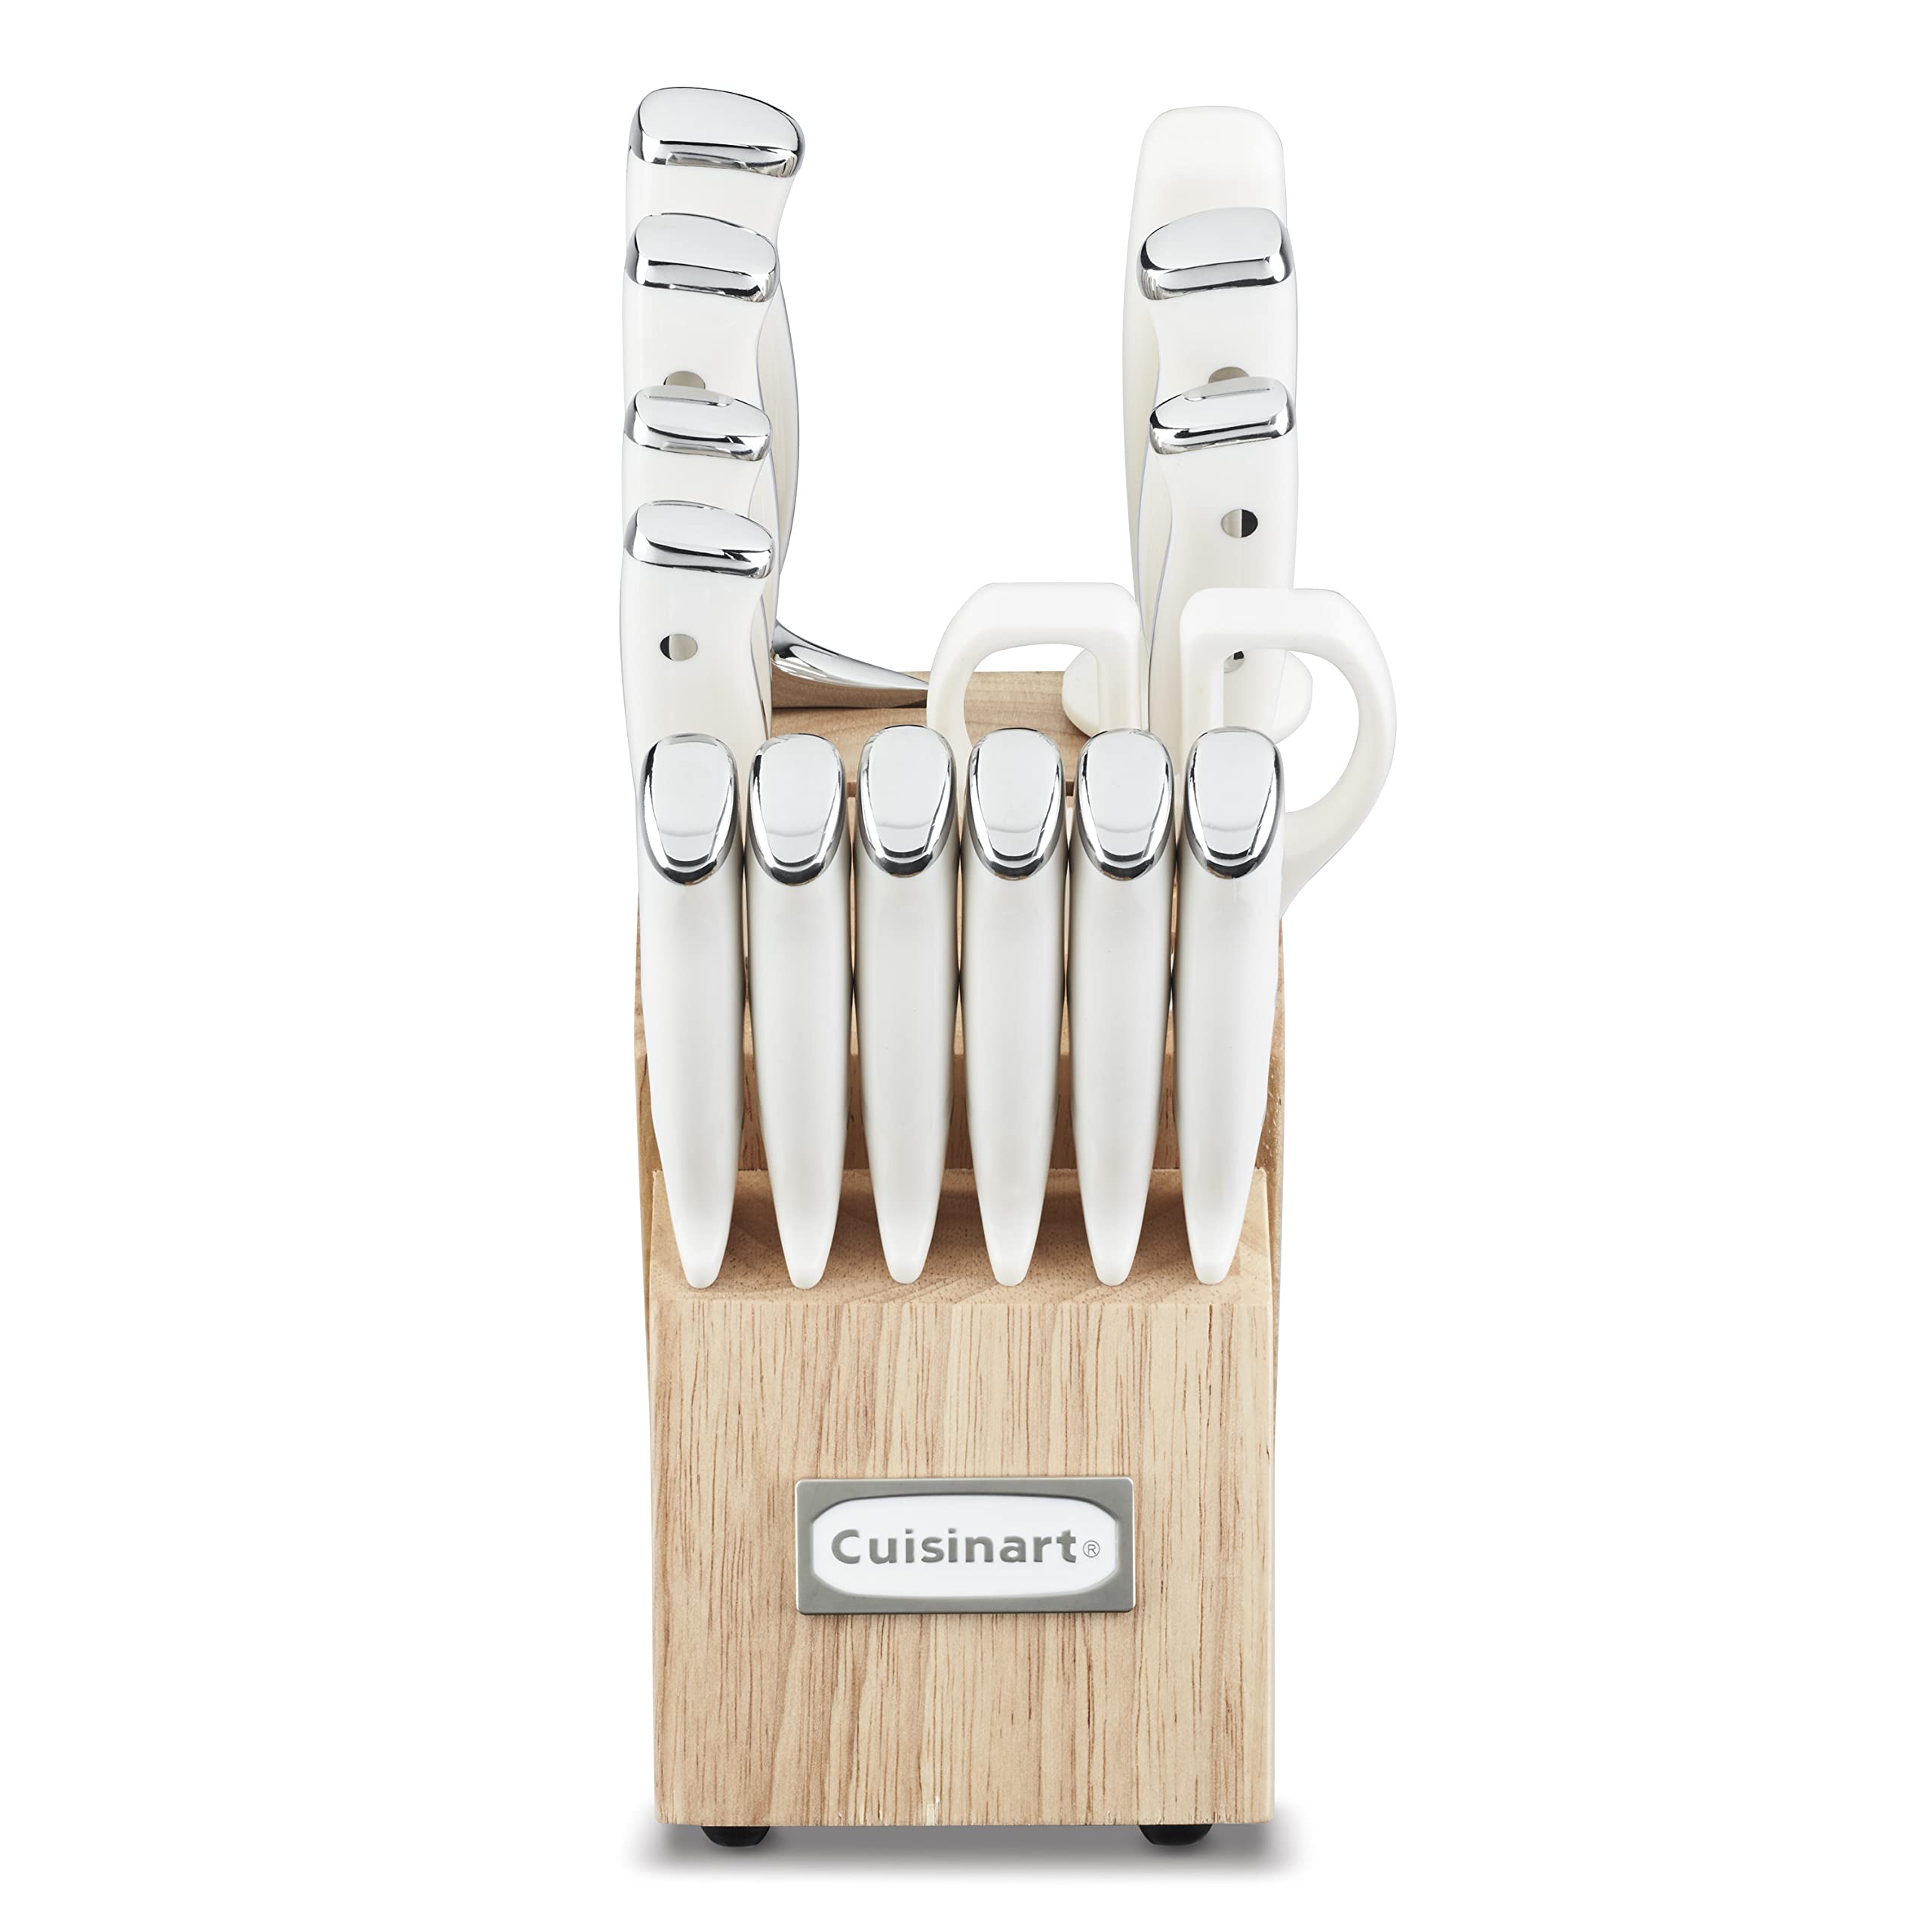 Cuisinart C77CTR-15P Classic Forged Triple Rivet, 15-Piece Knife Set with Block, Superior High-Carbon Stainless Steel Blades for Precision and Accuracy, Natural